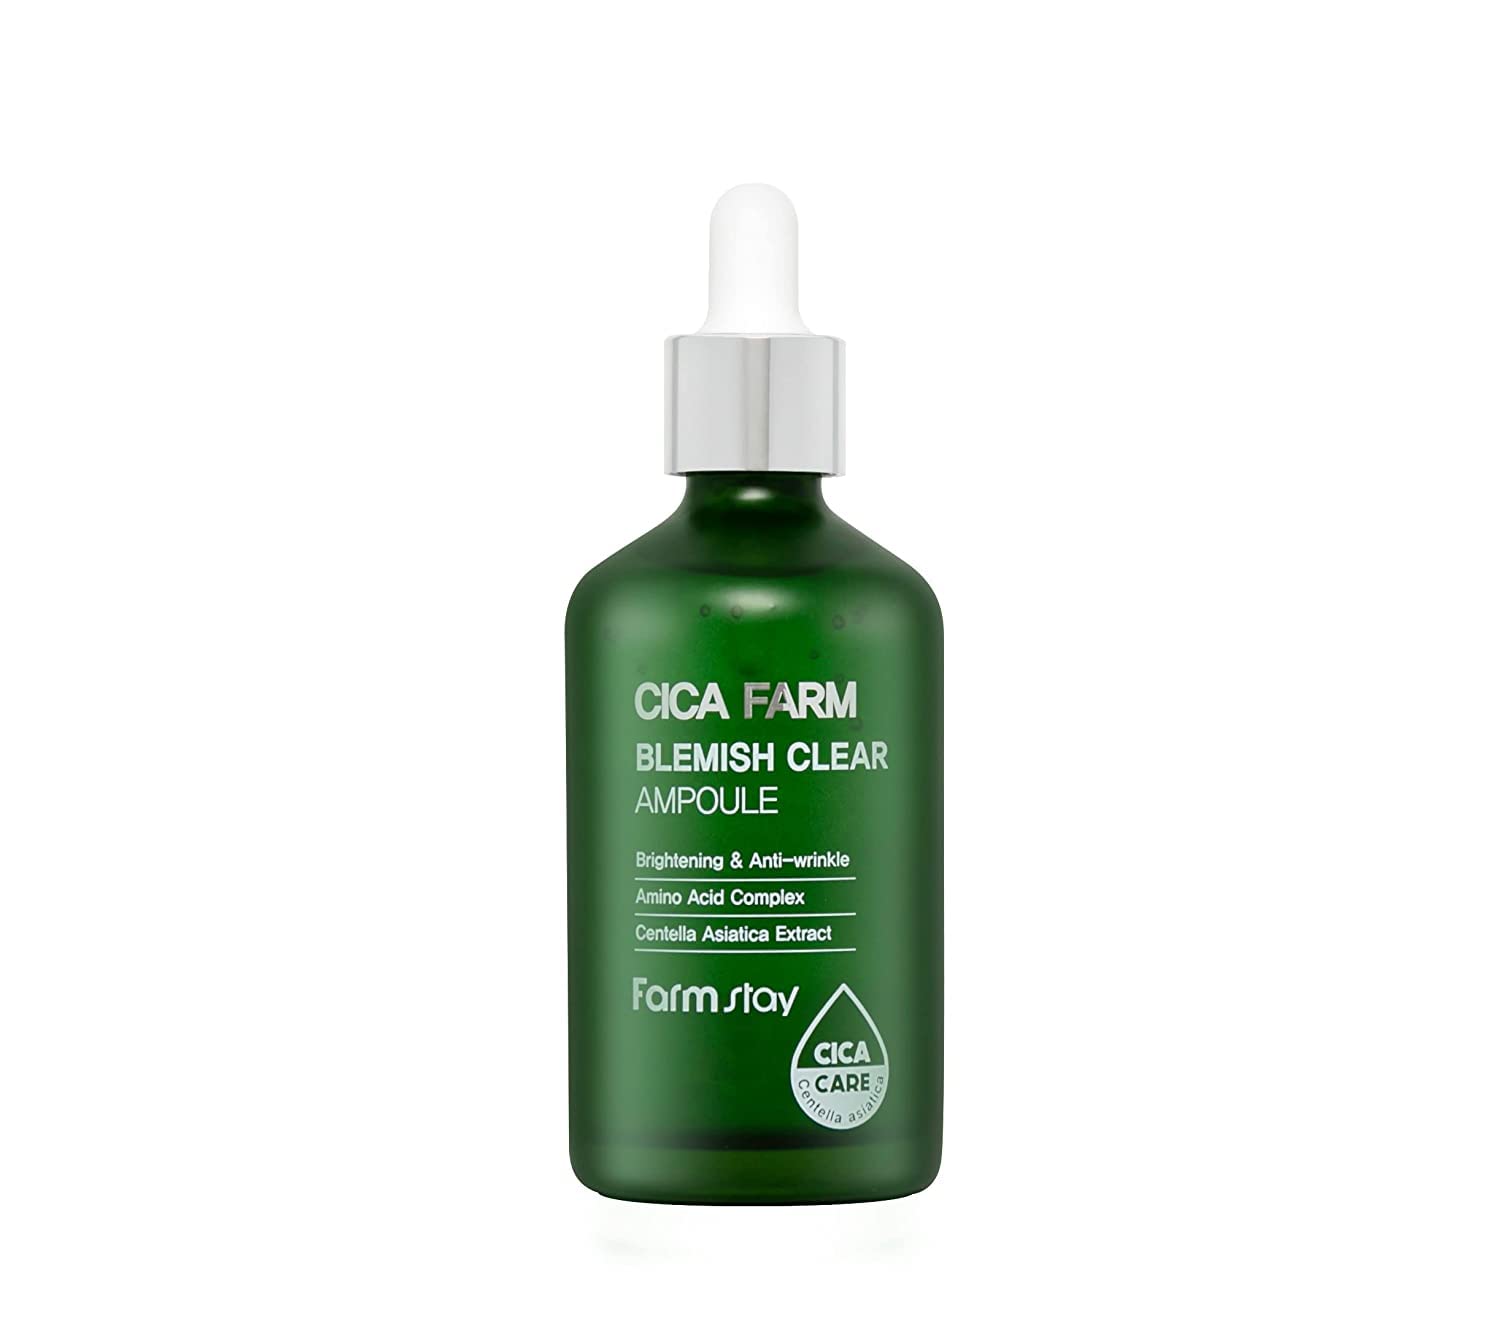 FARMSTAY CICA FARM Blemish Clear Ampoule 3.38 fl.oz / 100 ml | Hydrating, Calming, Soothing Ampoule for Dry Skin